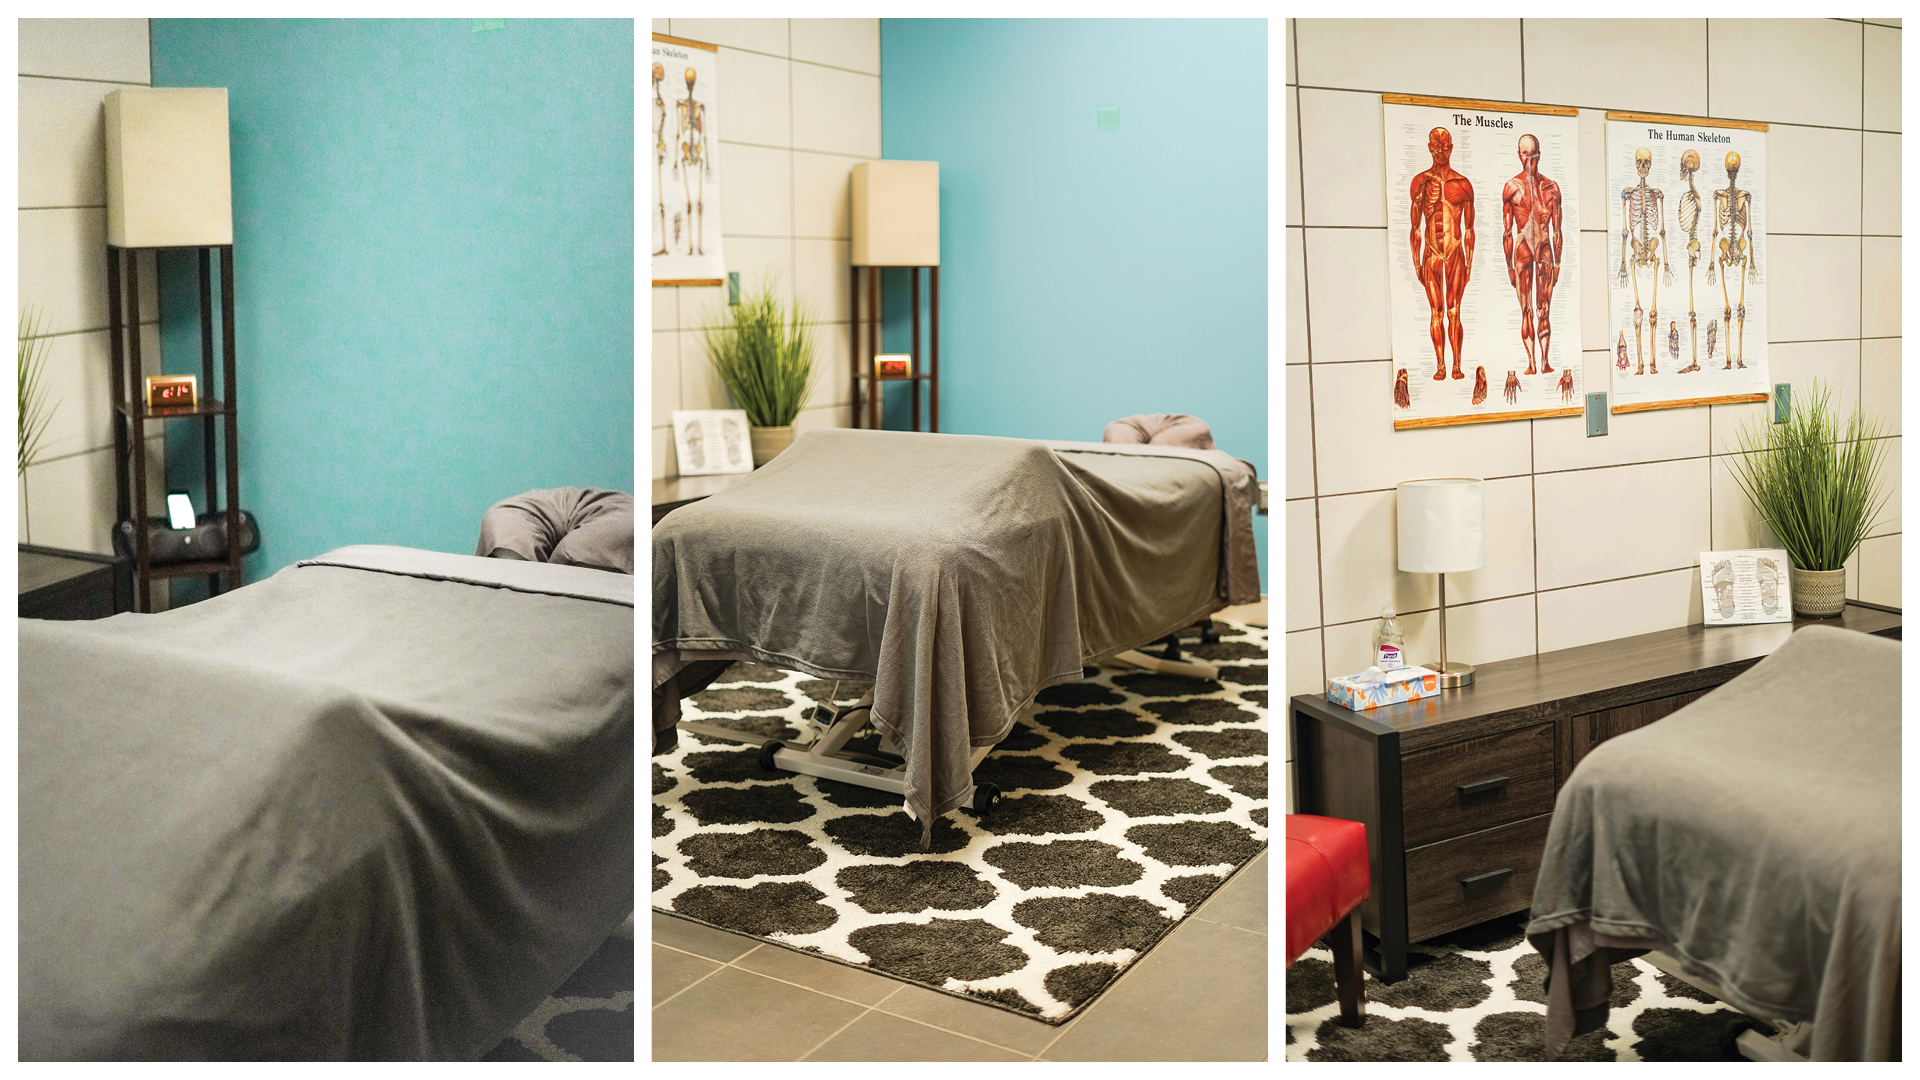 Pictures of the massage therapy space at the University Health Center.